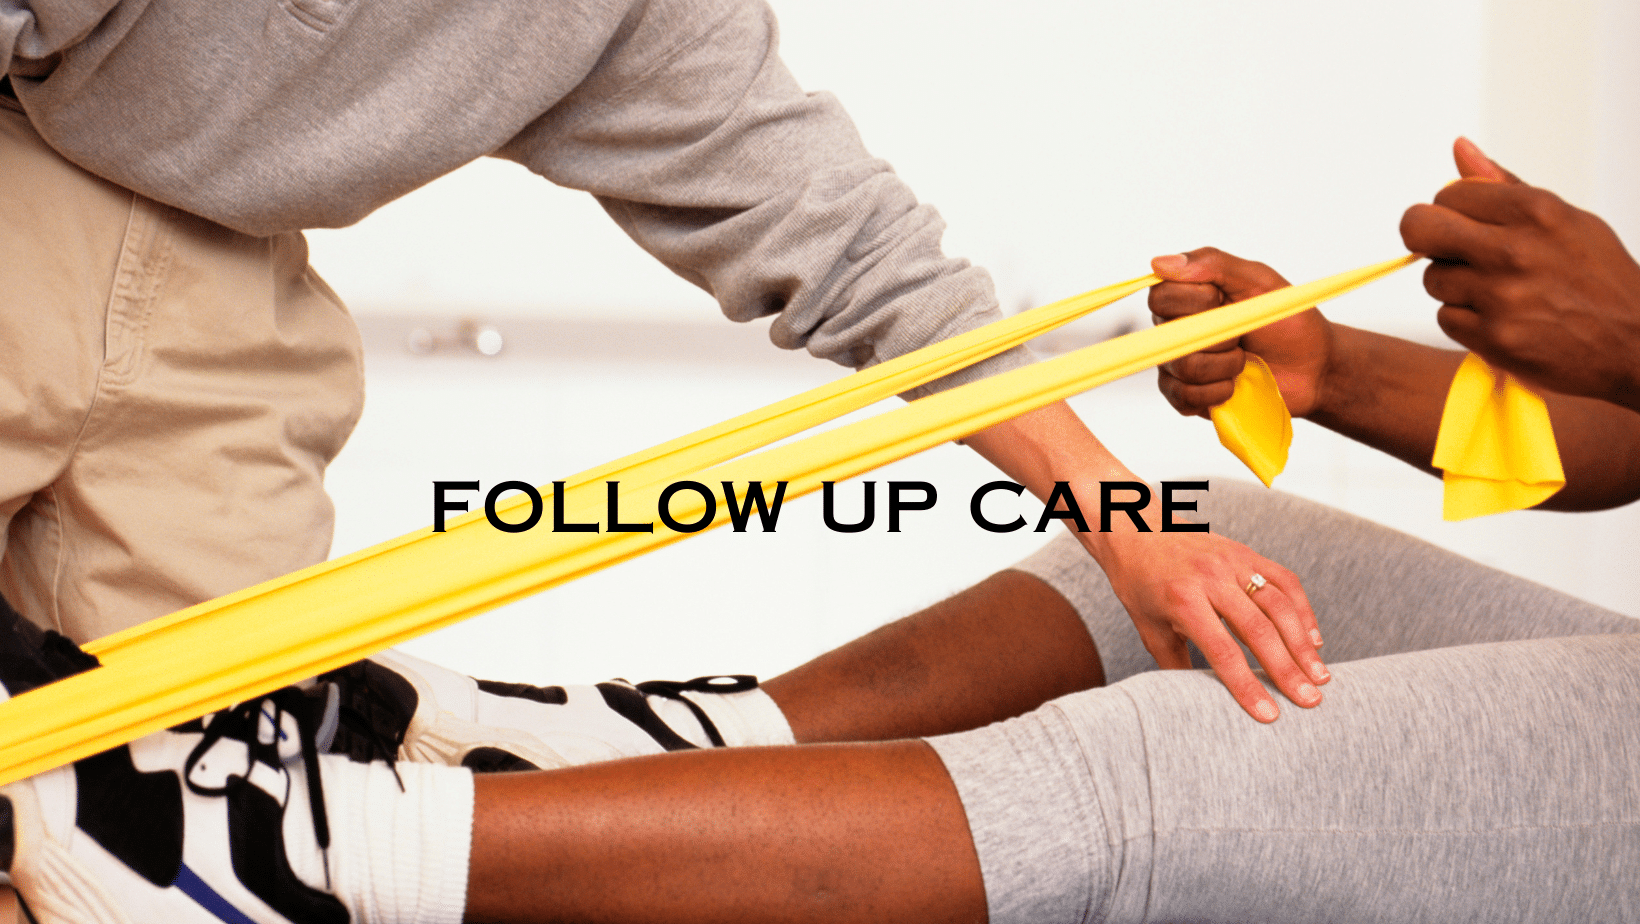 After a car accident crash, be sure to see a doctor or go to the emergency room. You also must do follow up care to show that your health is a priority and you are following doctor's advice.